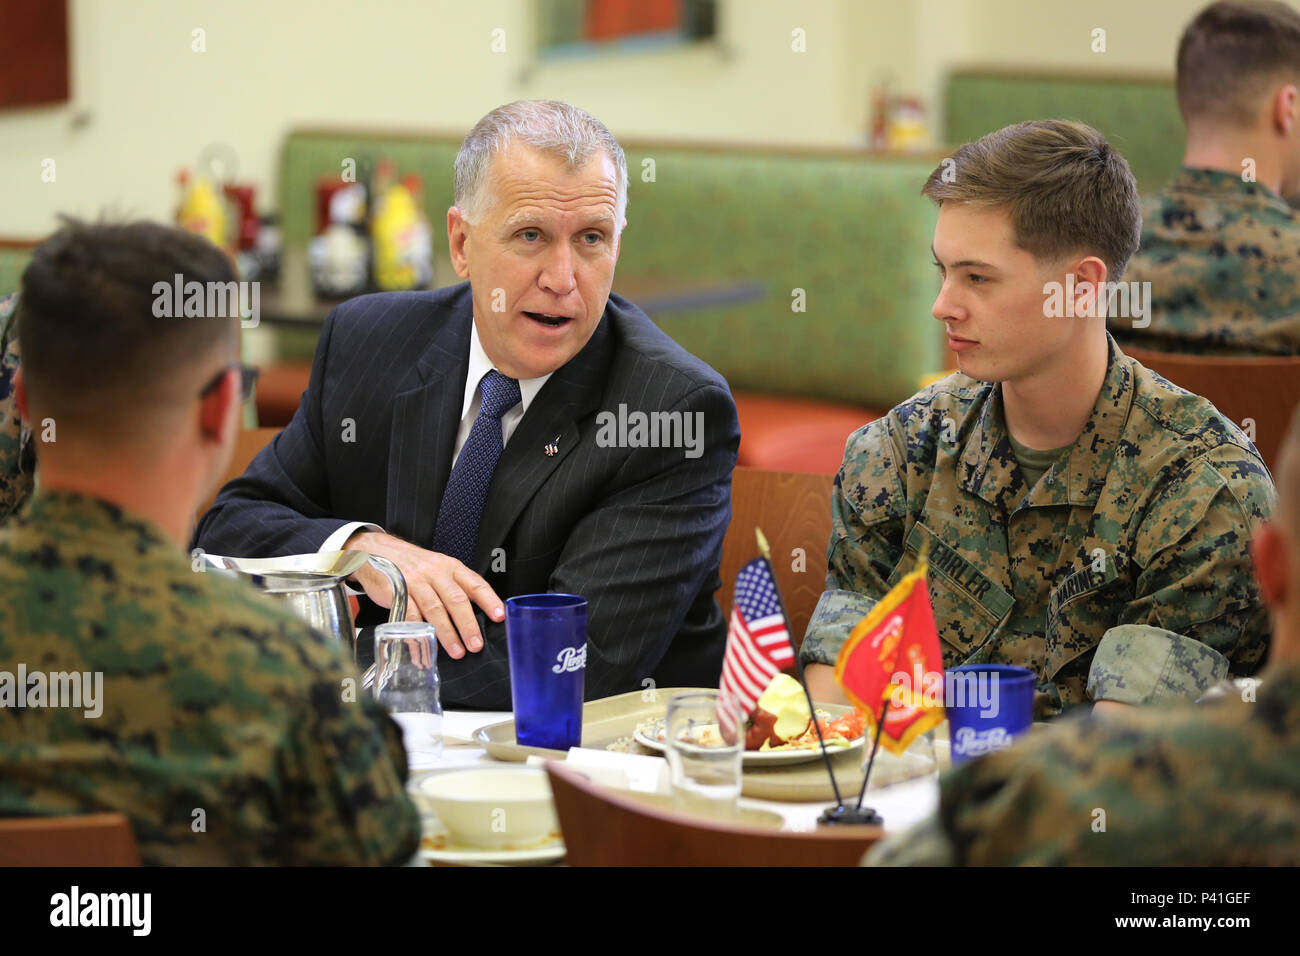 Sen. Thom Tillis shares a meal with Marines at the mess hall during a visit at Marine Corps Air Station Cherry Point, N.C., June 1, 2016. Tillis visited the air station to address the needs and priorities of the base, and assess the Marine Corps’ presence in North Carolina. Tillis also toured Fleet Readiness Center East. Tillis is a North Carolina senator. (U.S. Marine Corps photo by Lance Cpl. Mackenzie Gibson/Released) Stock Photo